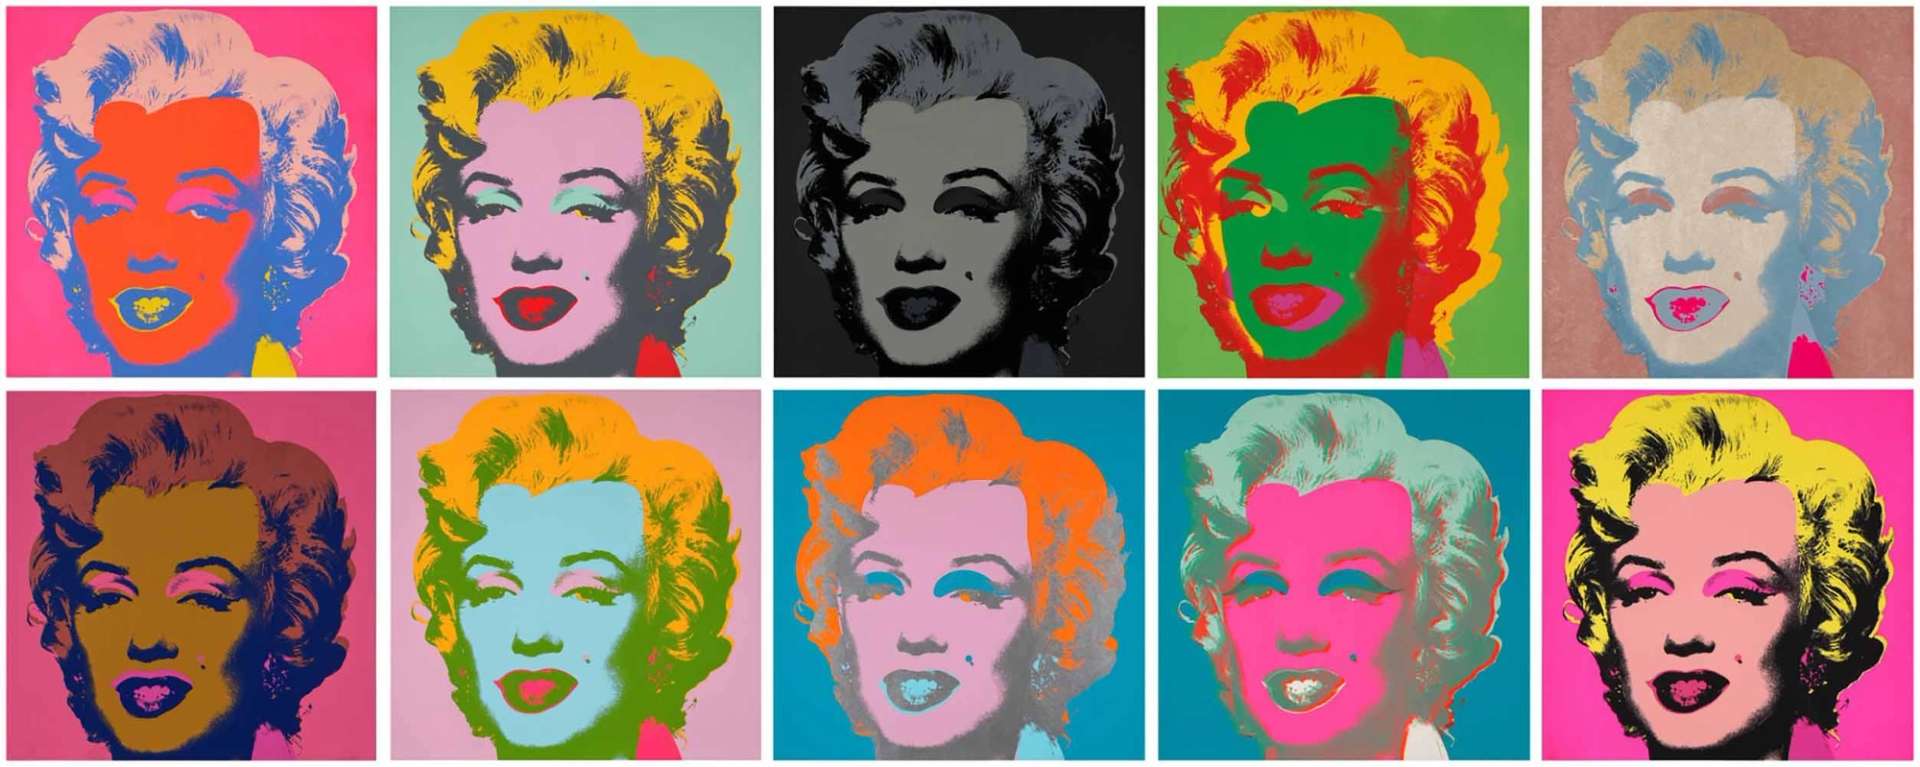 A complete set of Marilyn Monroe's portraits done by Andy Warhol in a variety of colours and hues.